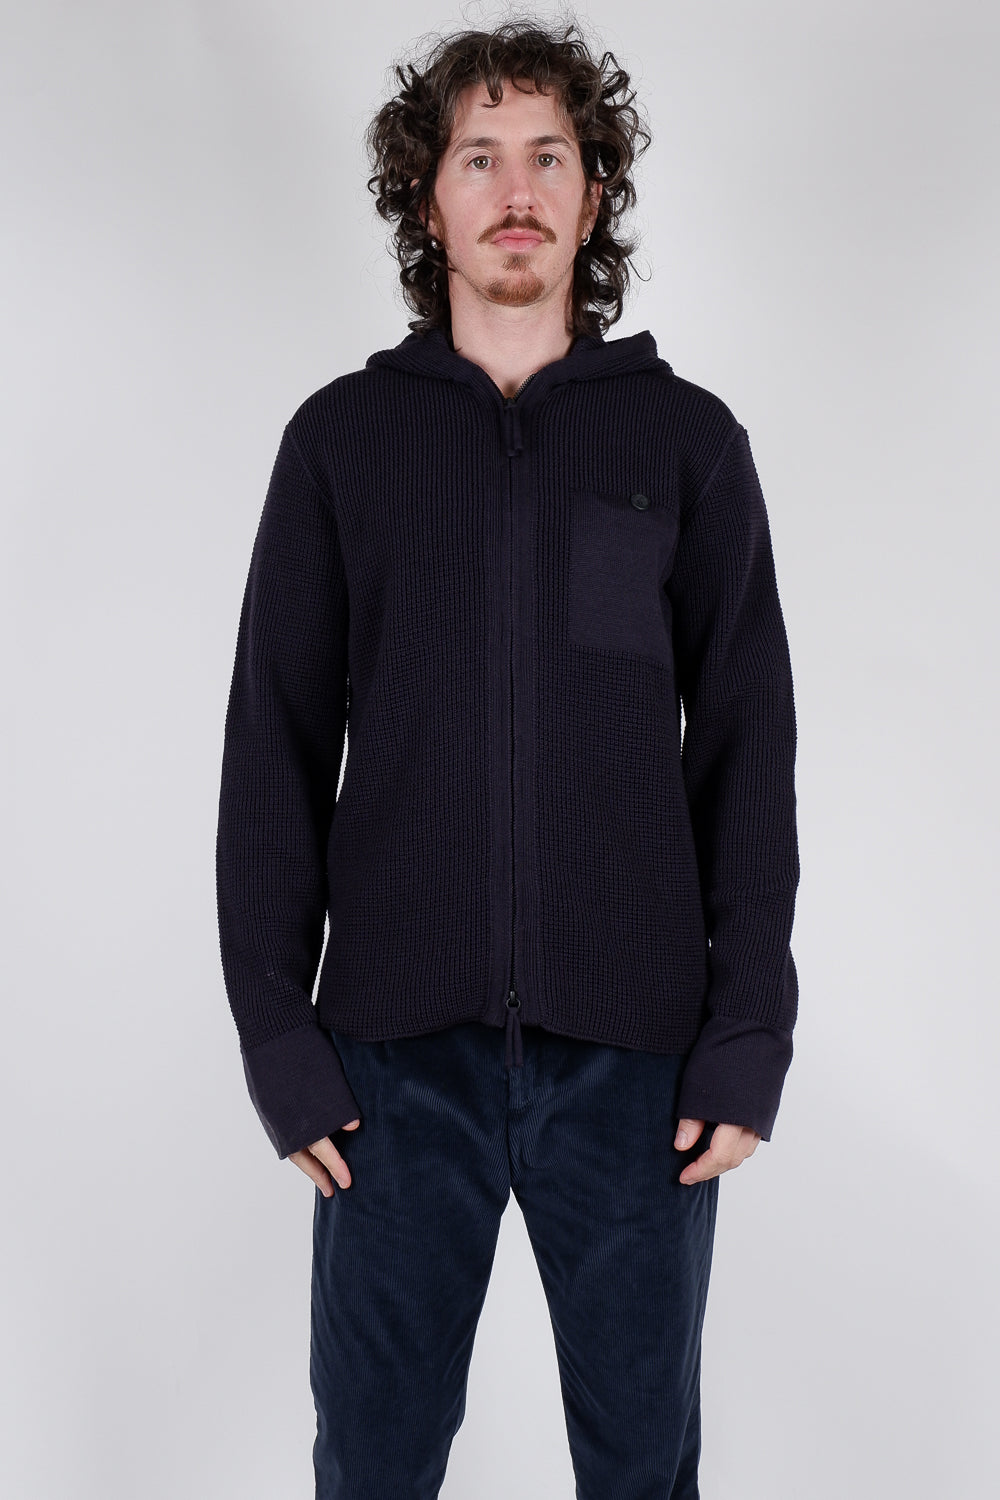 Buy the Hannes Roether Zip-Up Wool Cardigan in Navy at Intro. Spend £50 for free UK delivery. Official stockists. We ship worldwide.